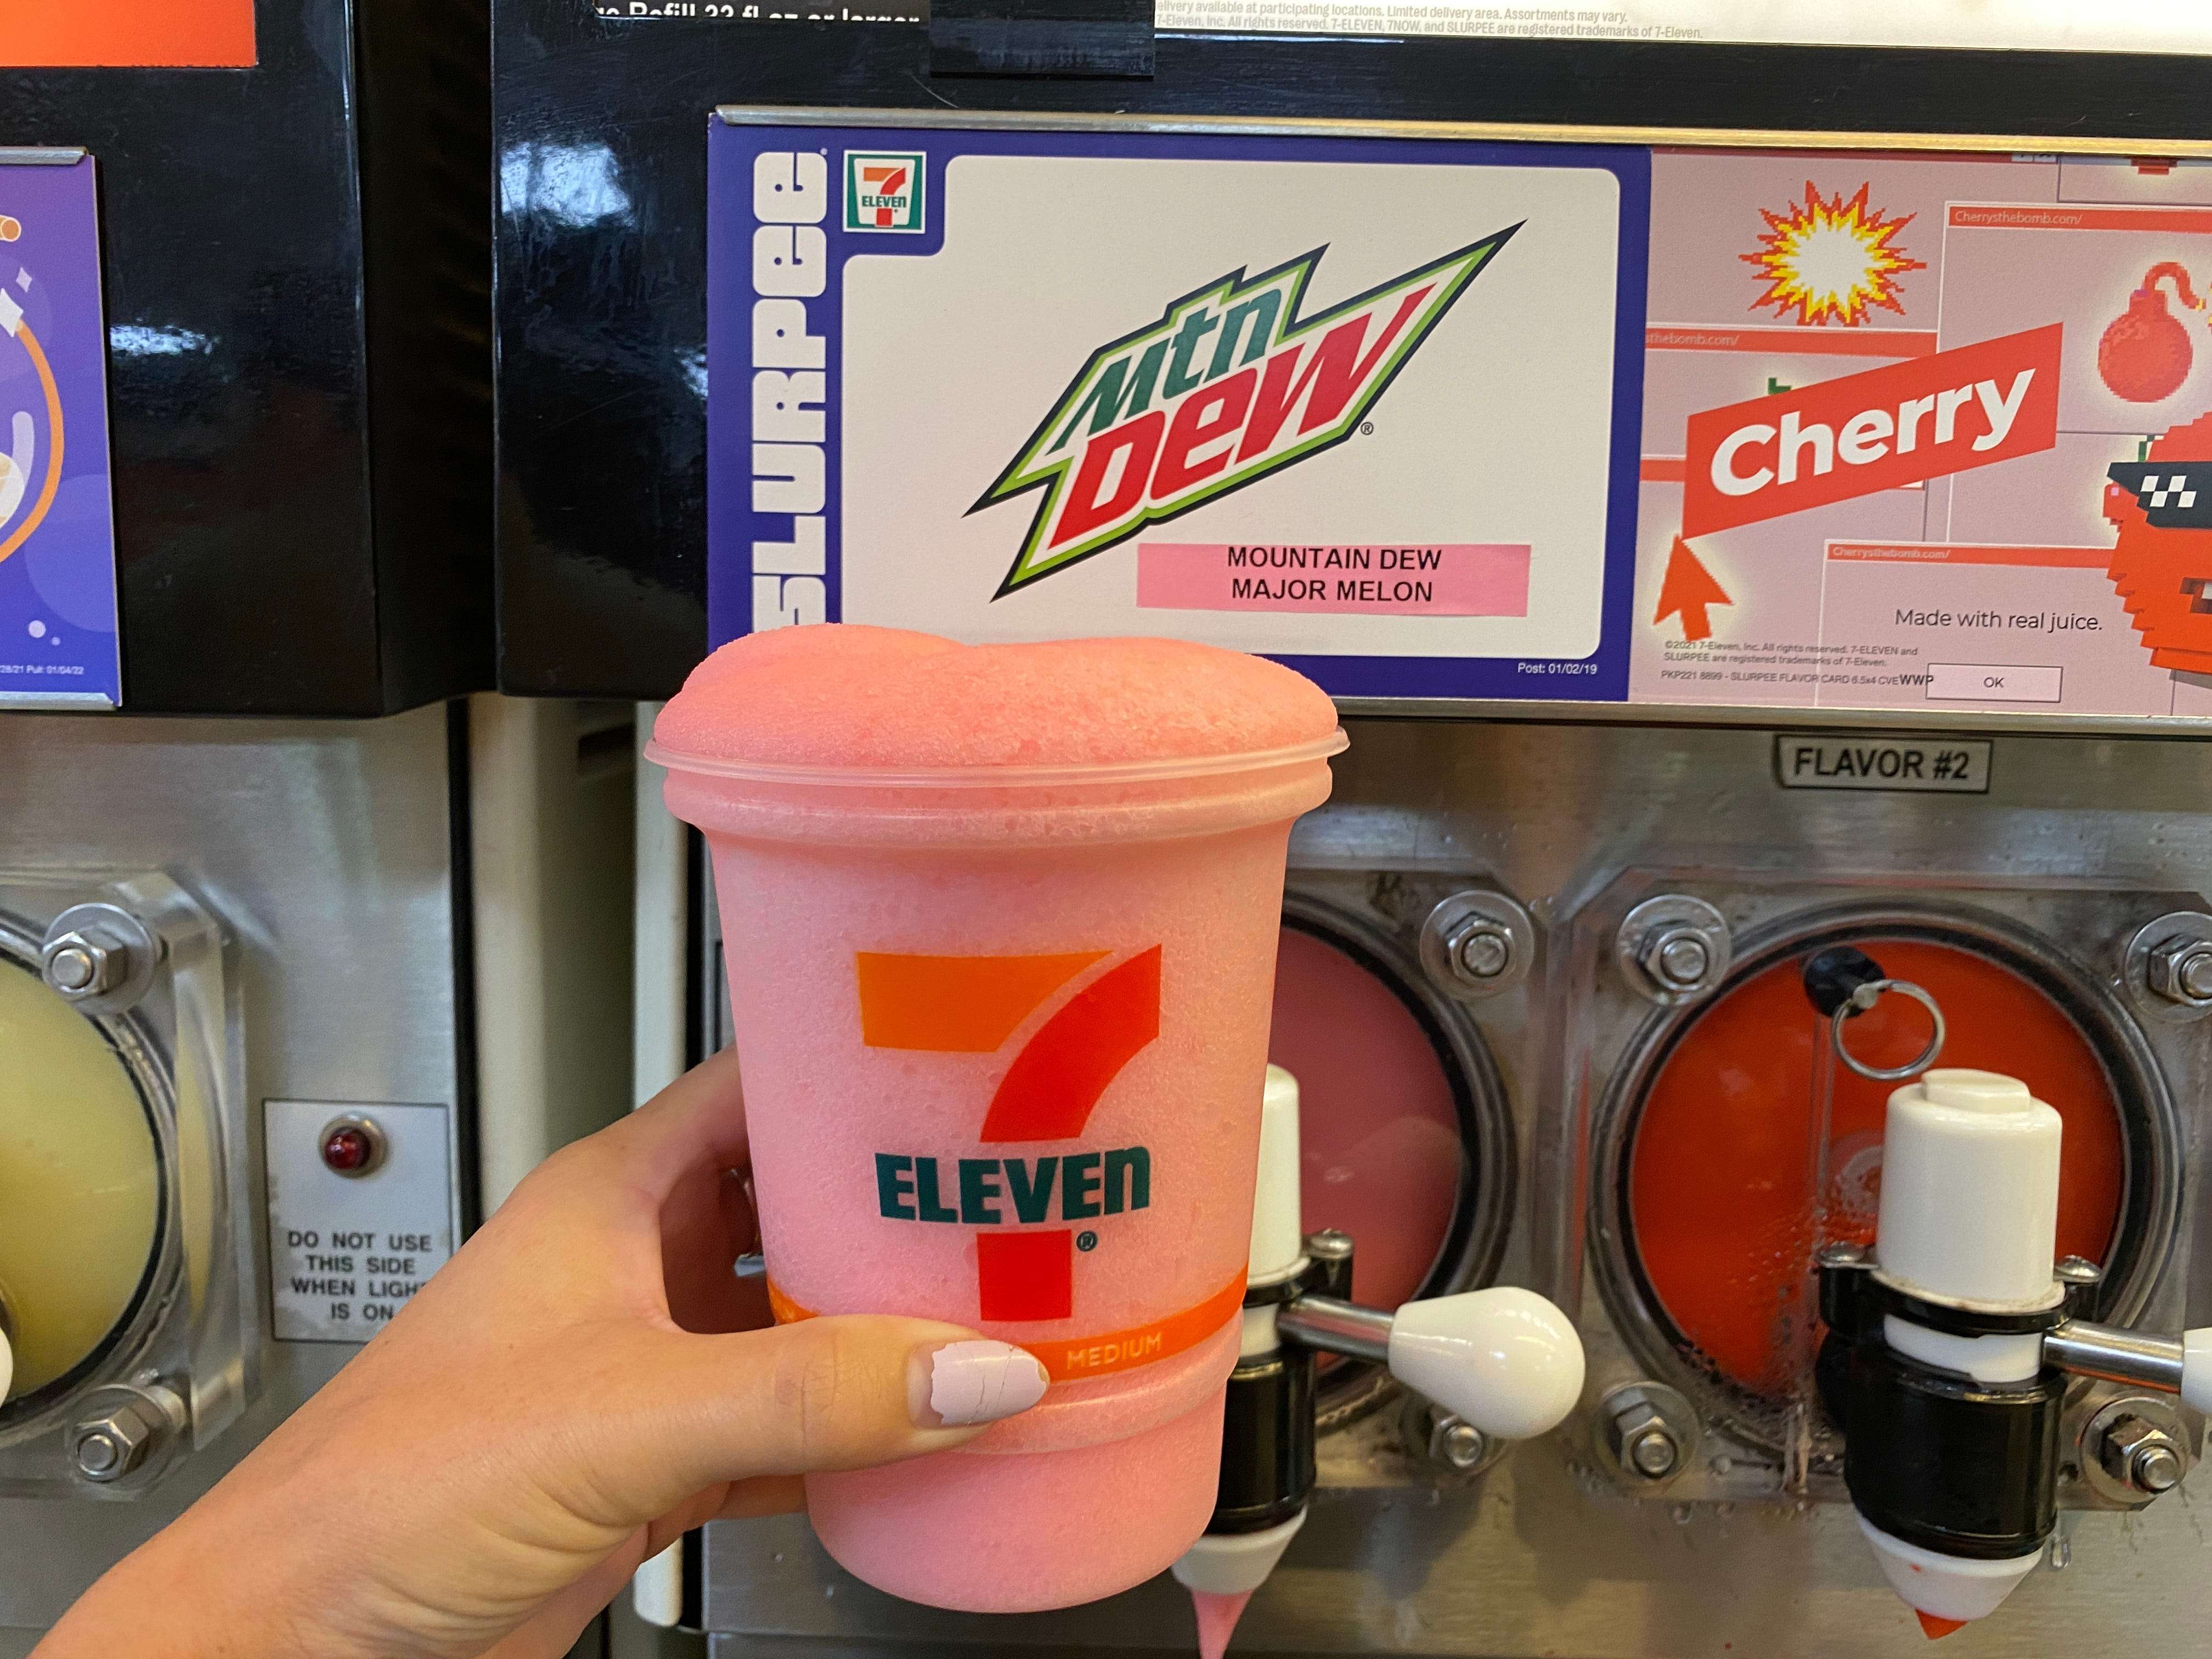 I tried every Slurpee flavor at 7Eleven I could find and ranked them